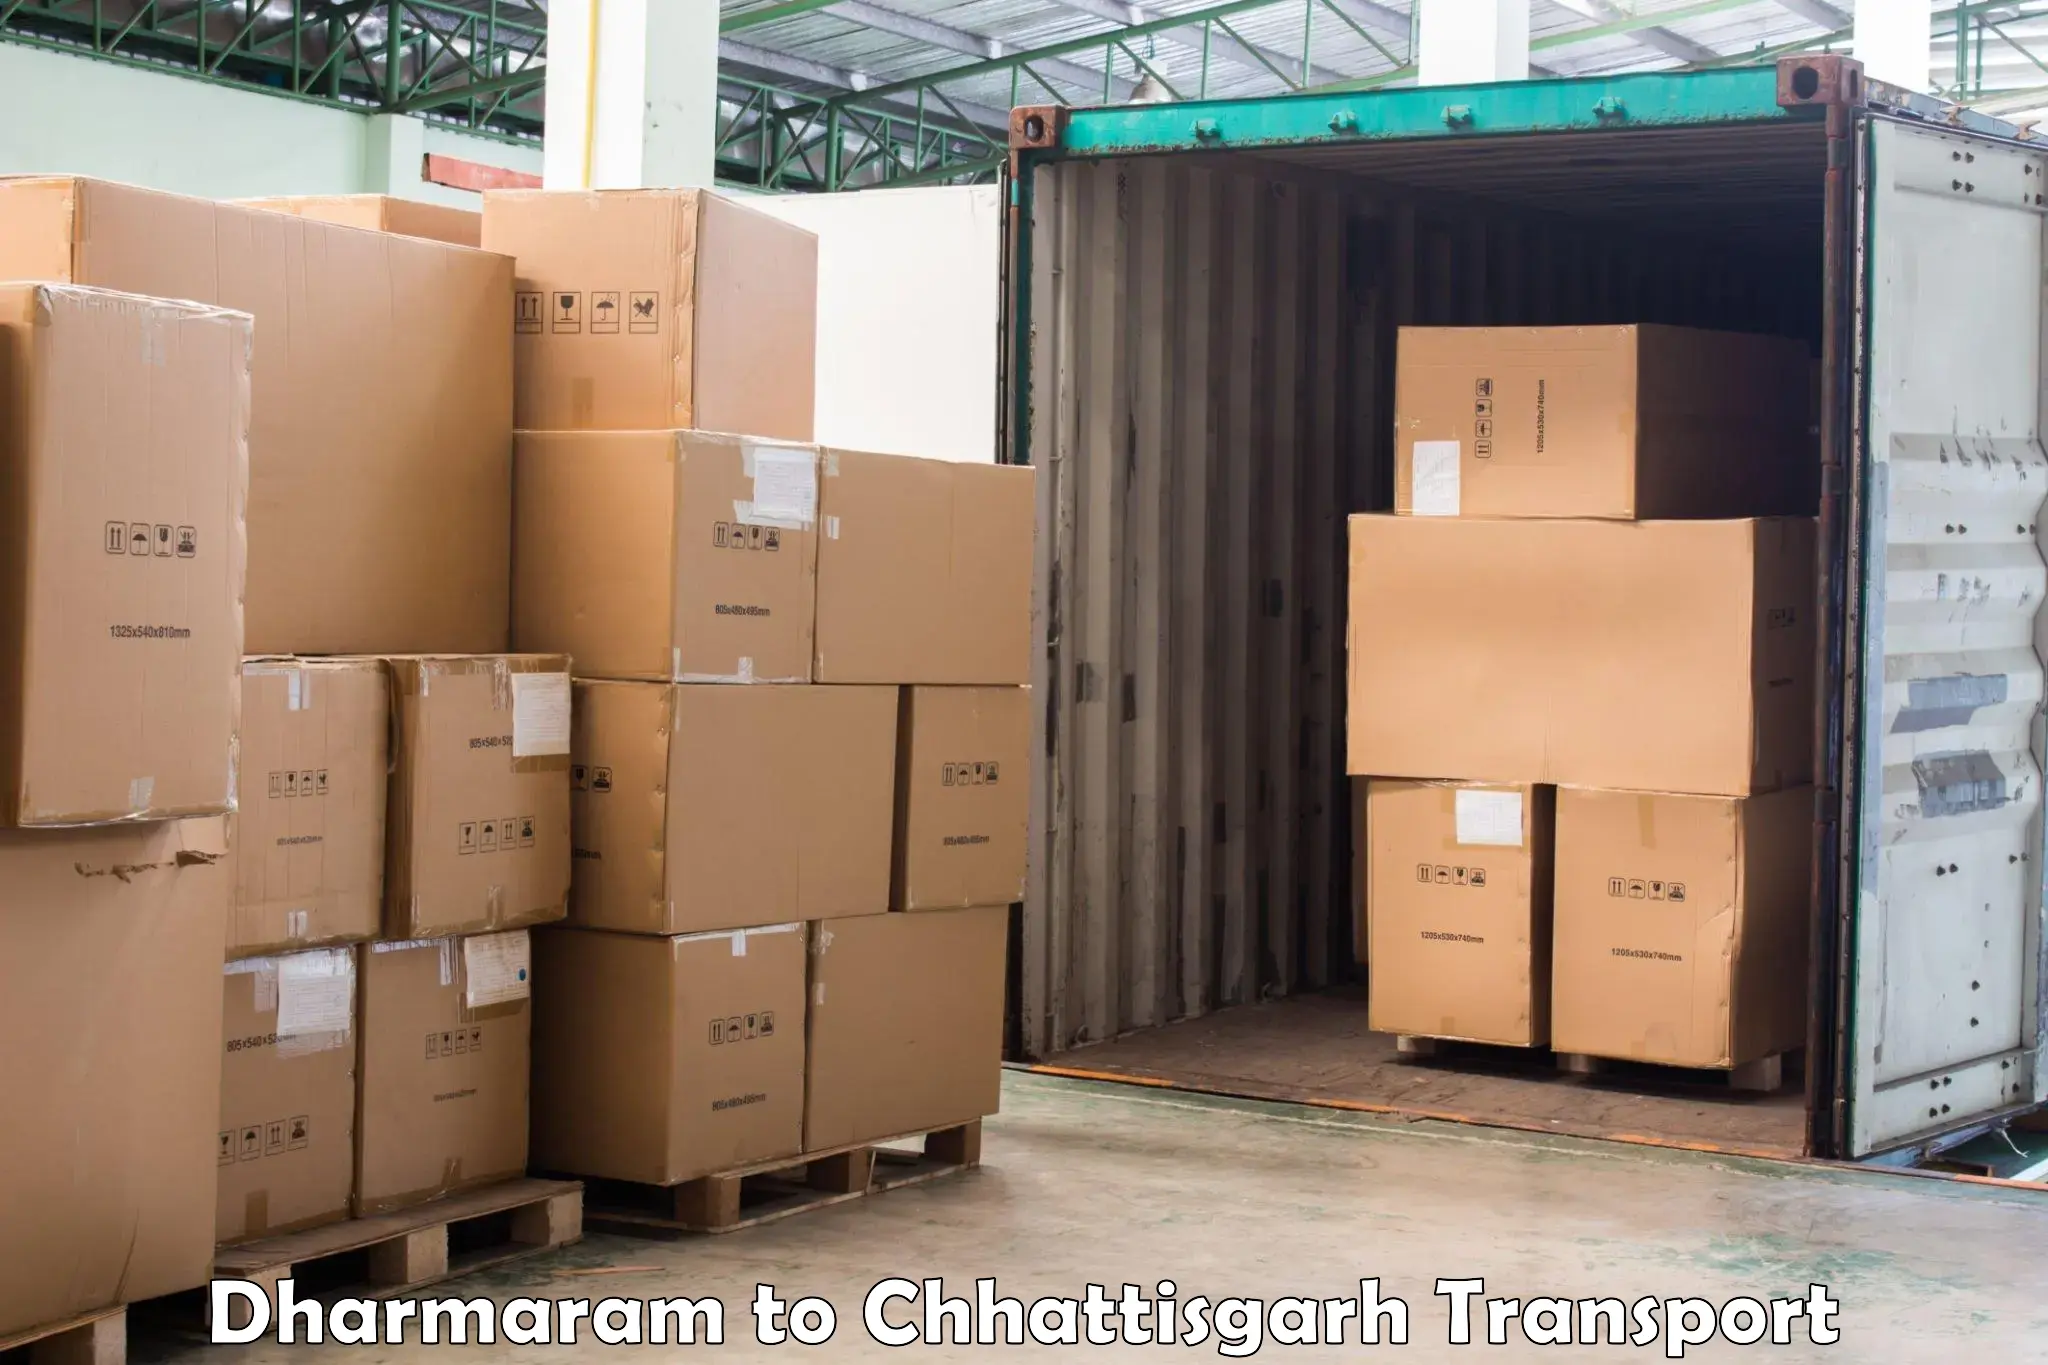 Air freight transport services in Dharmaram to Shivrinarayan